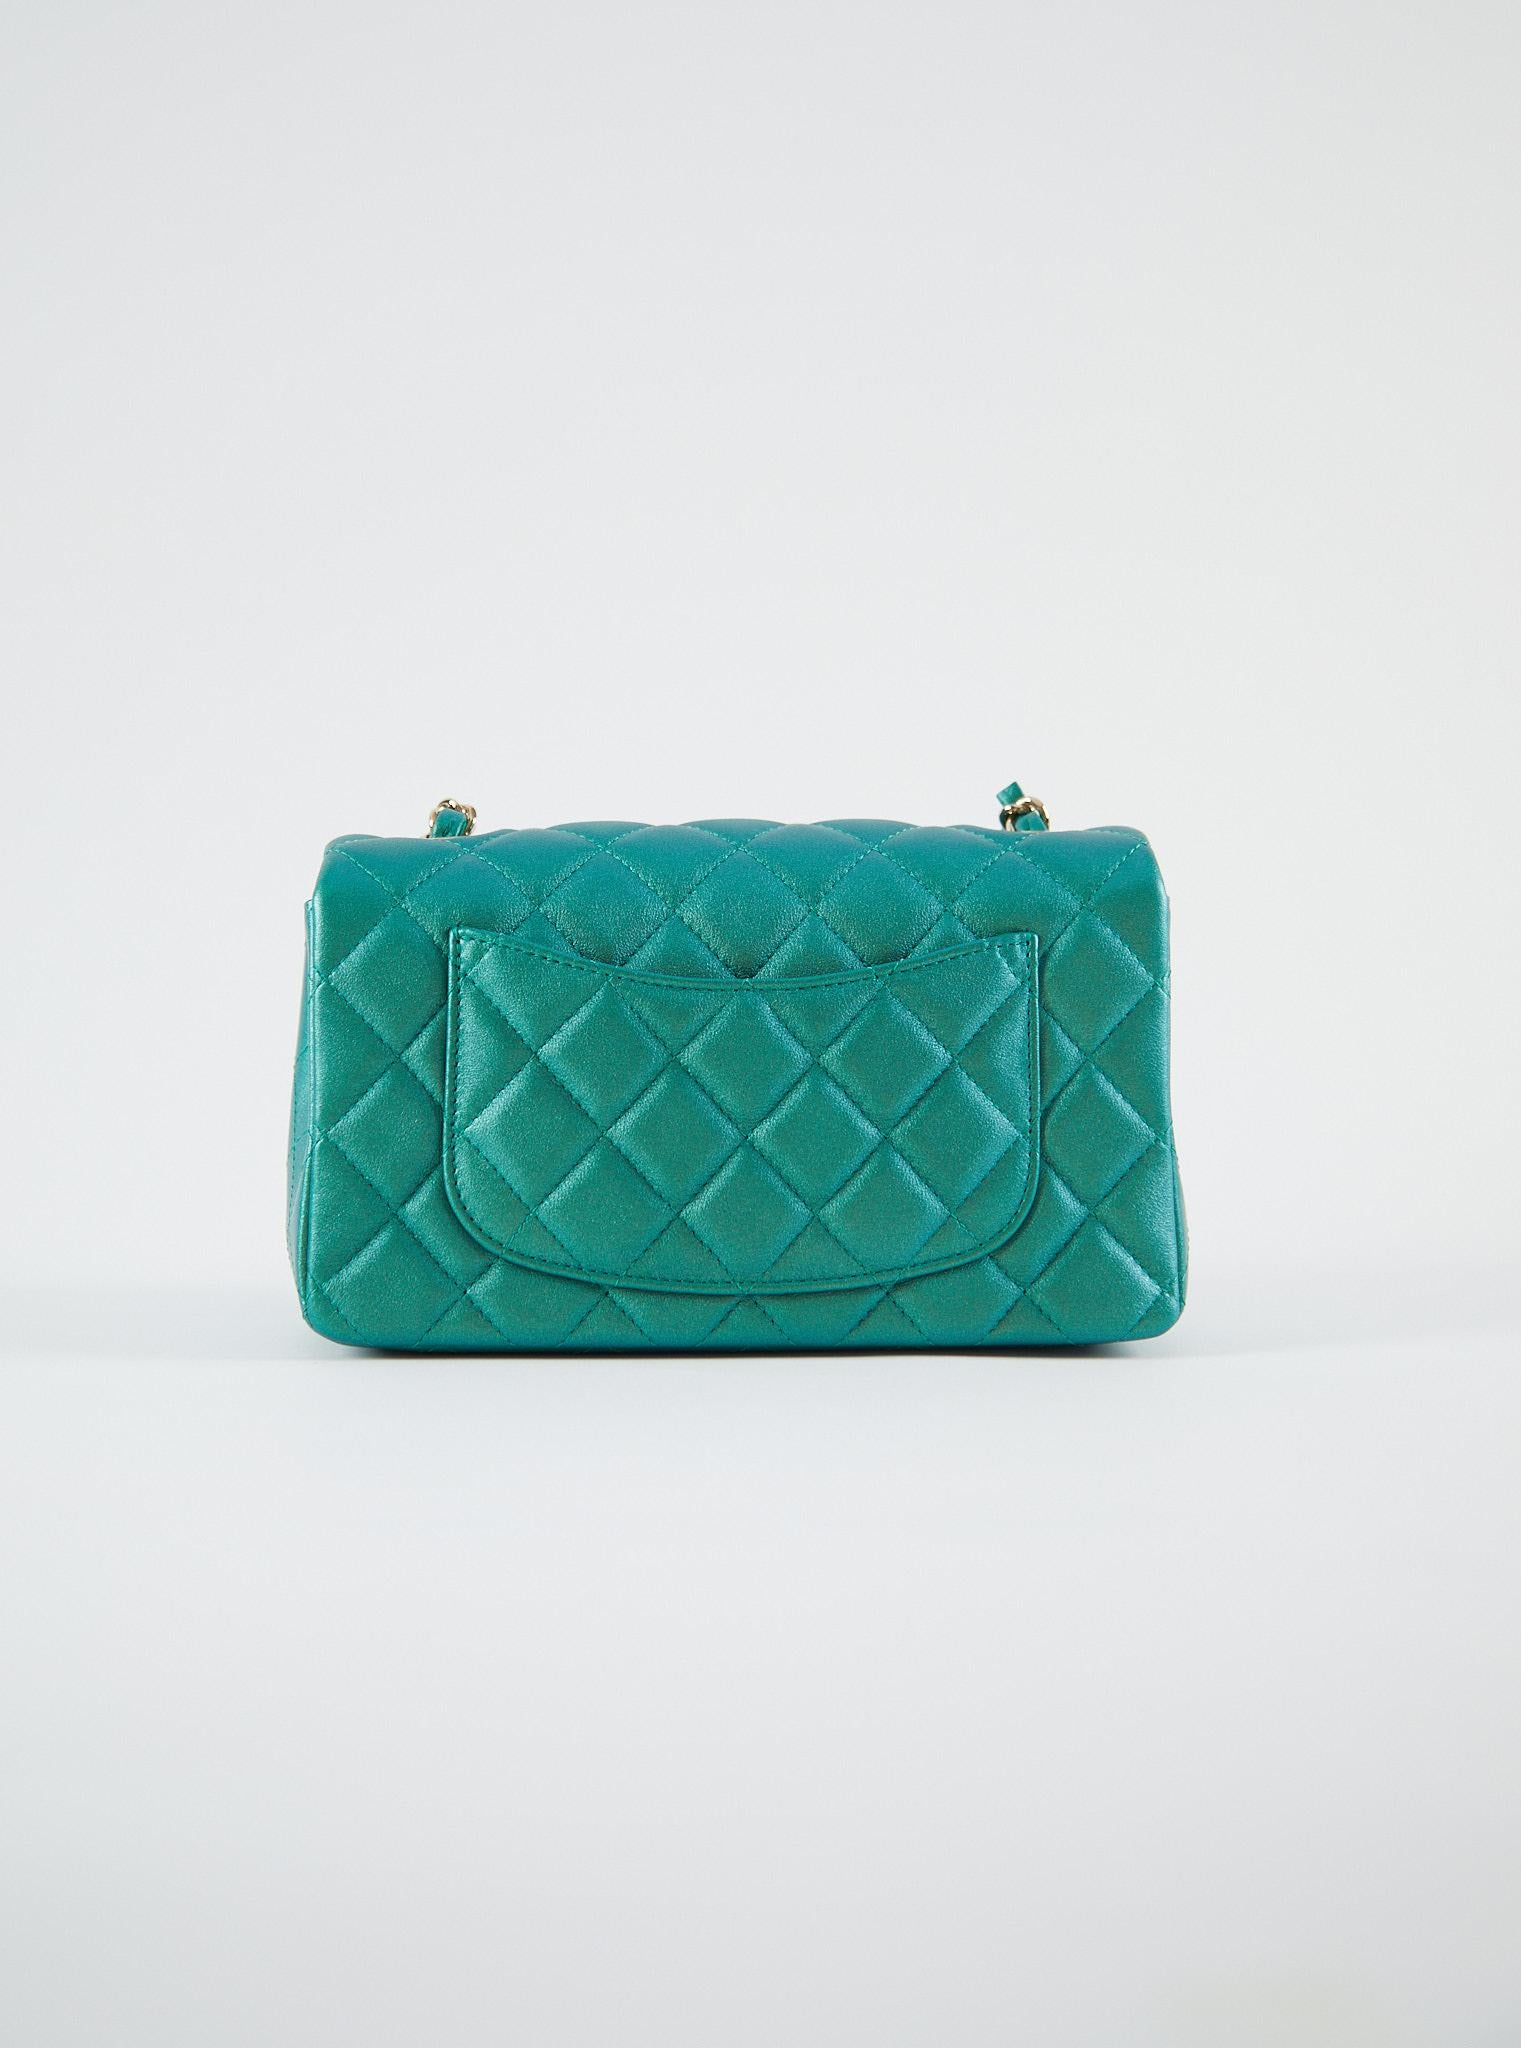 Women's or Men's CHANEL MINI FLAP BAG PEARLESCENT GREEN Lambskin Leather with Champagne Hardware